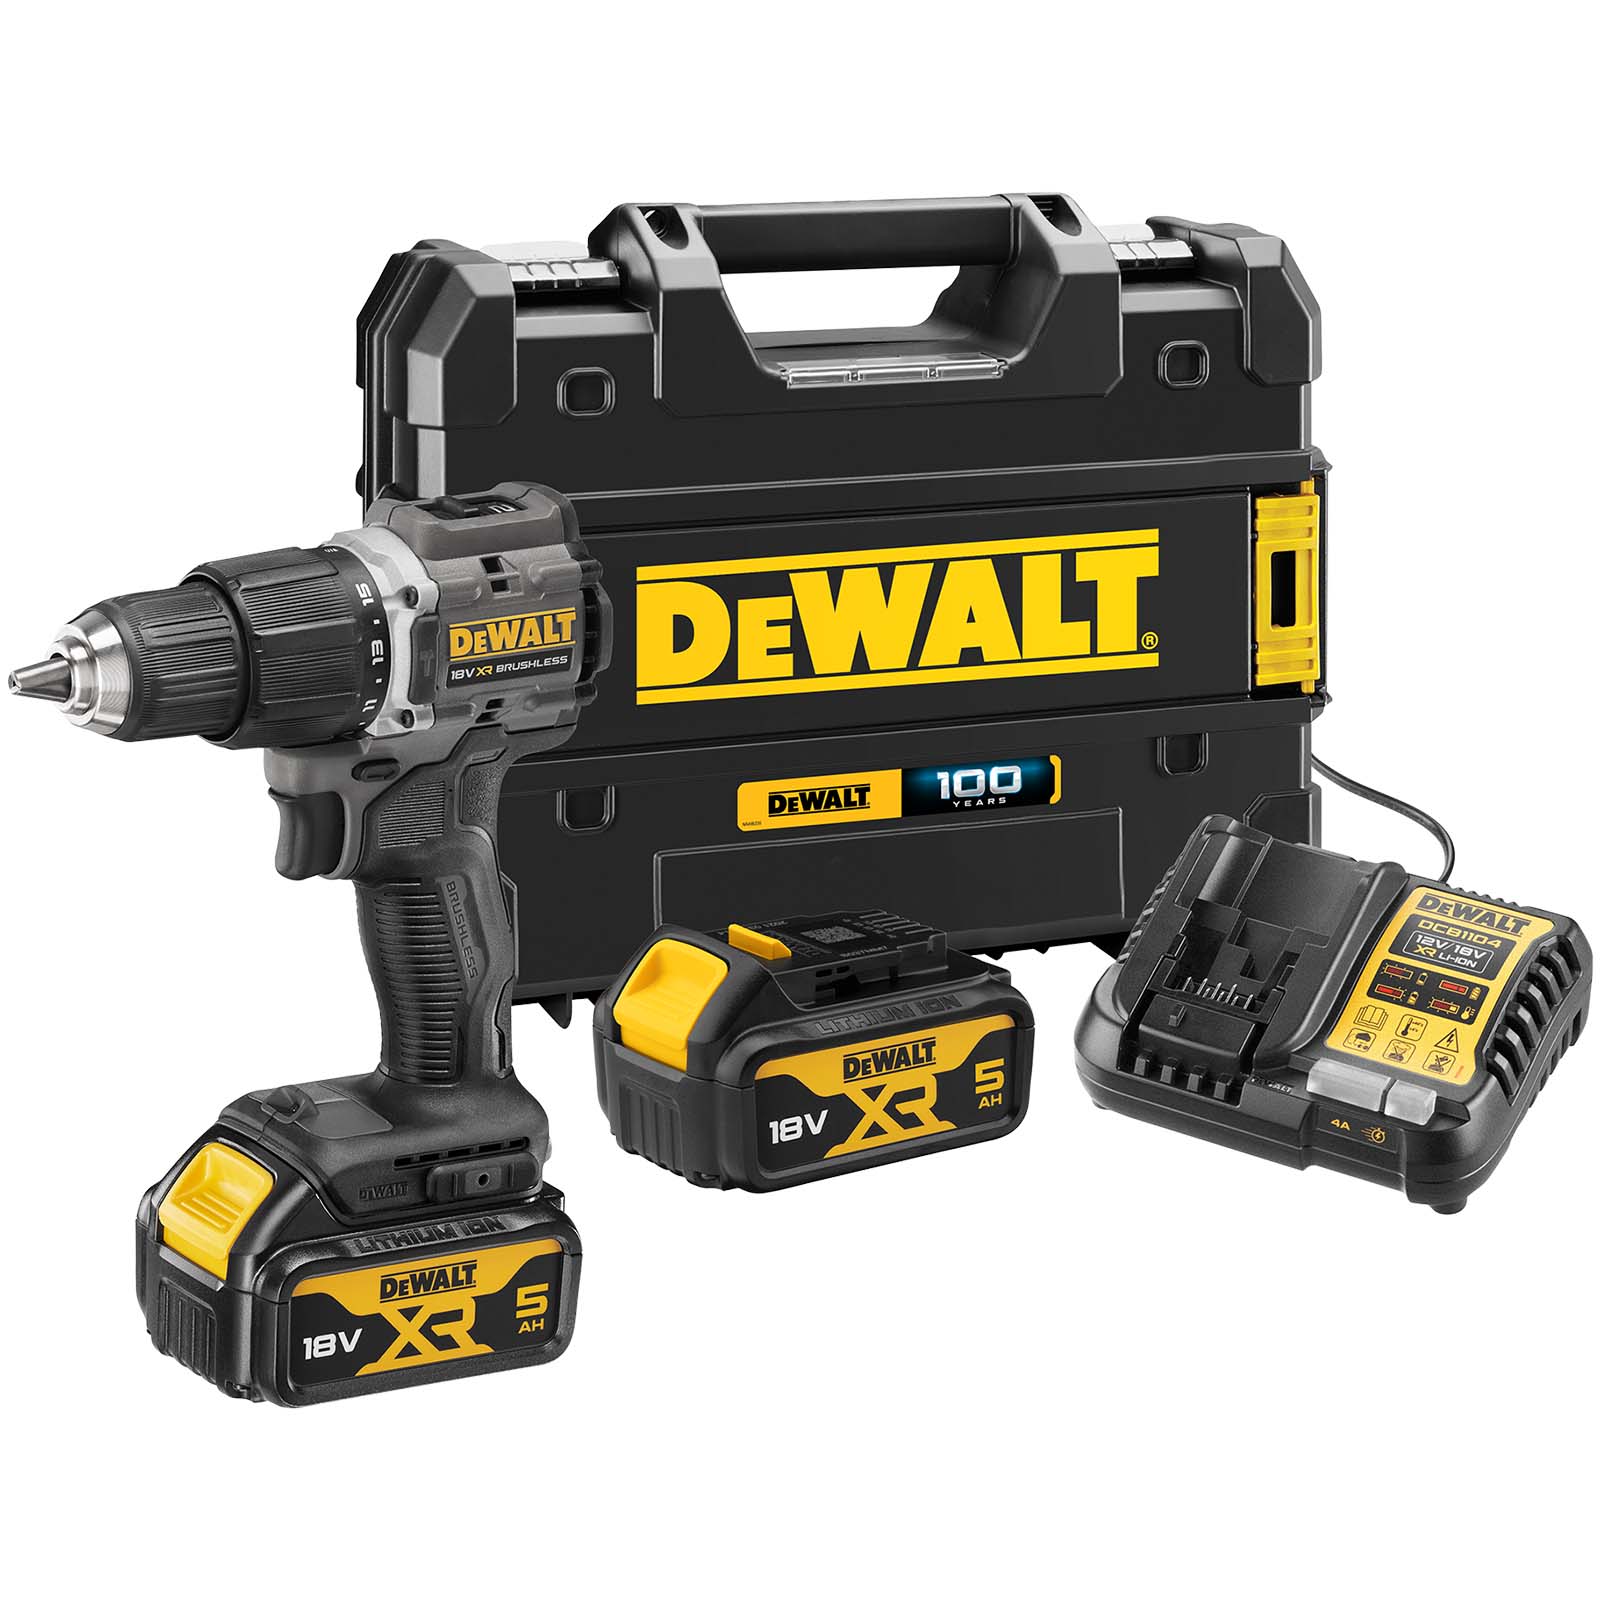 Dewalt DCD100 18V XR Brushless Limited Edition 100 Year Combi Drill 2 x 5ah Li-ion Charger Case